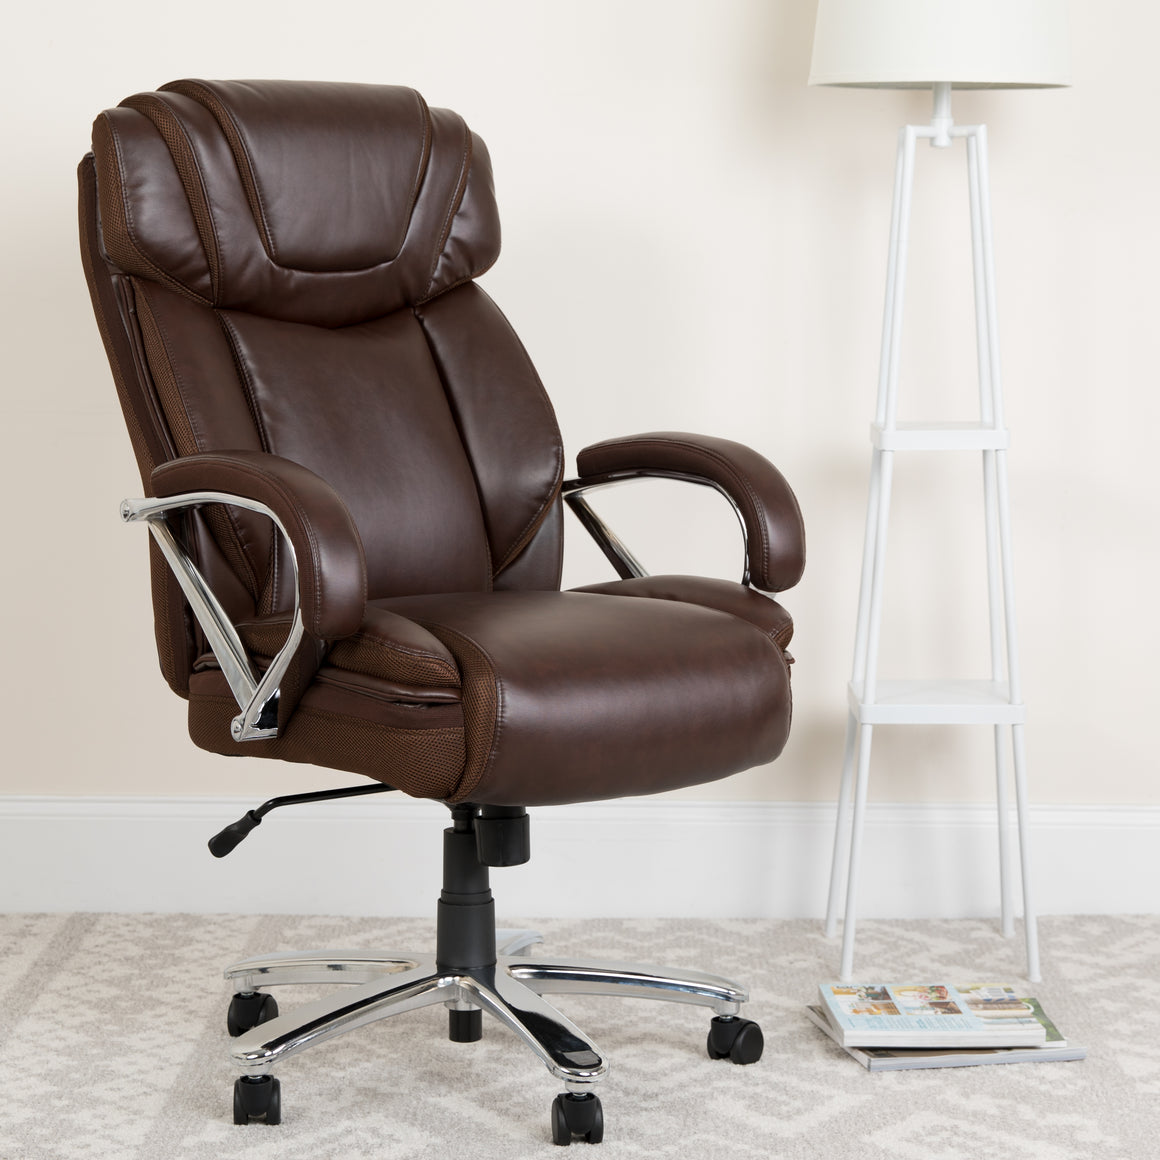 Hercules 500 LB. Capacity Big & Tall Brown Leather Executive Chair - Man Cave Boutique